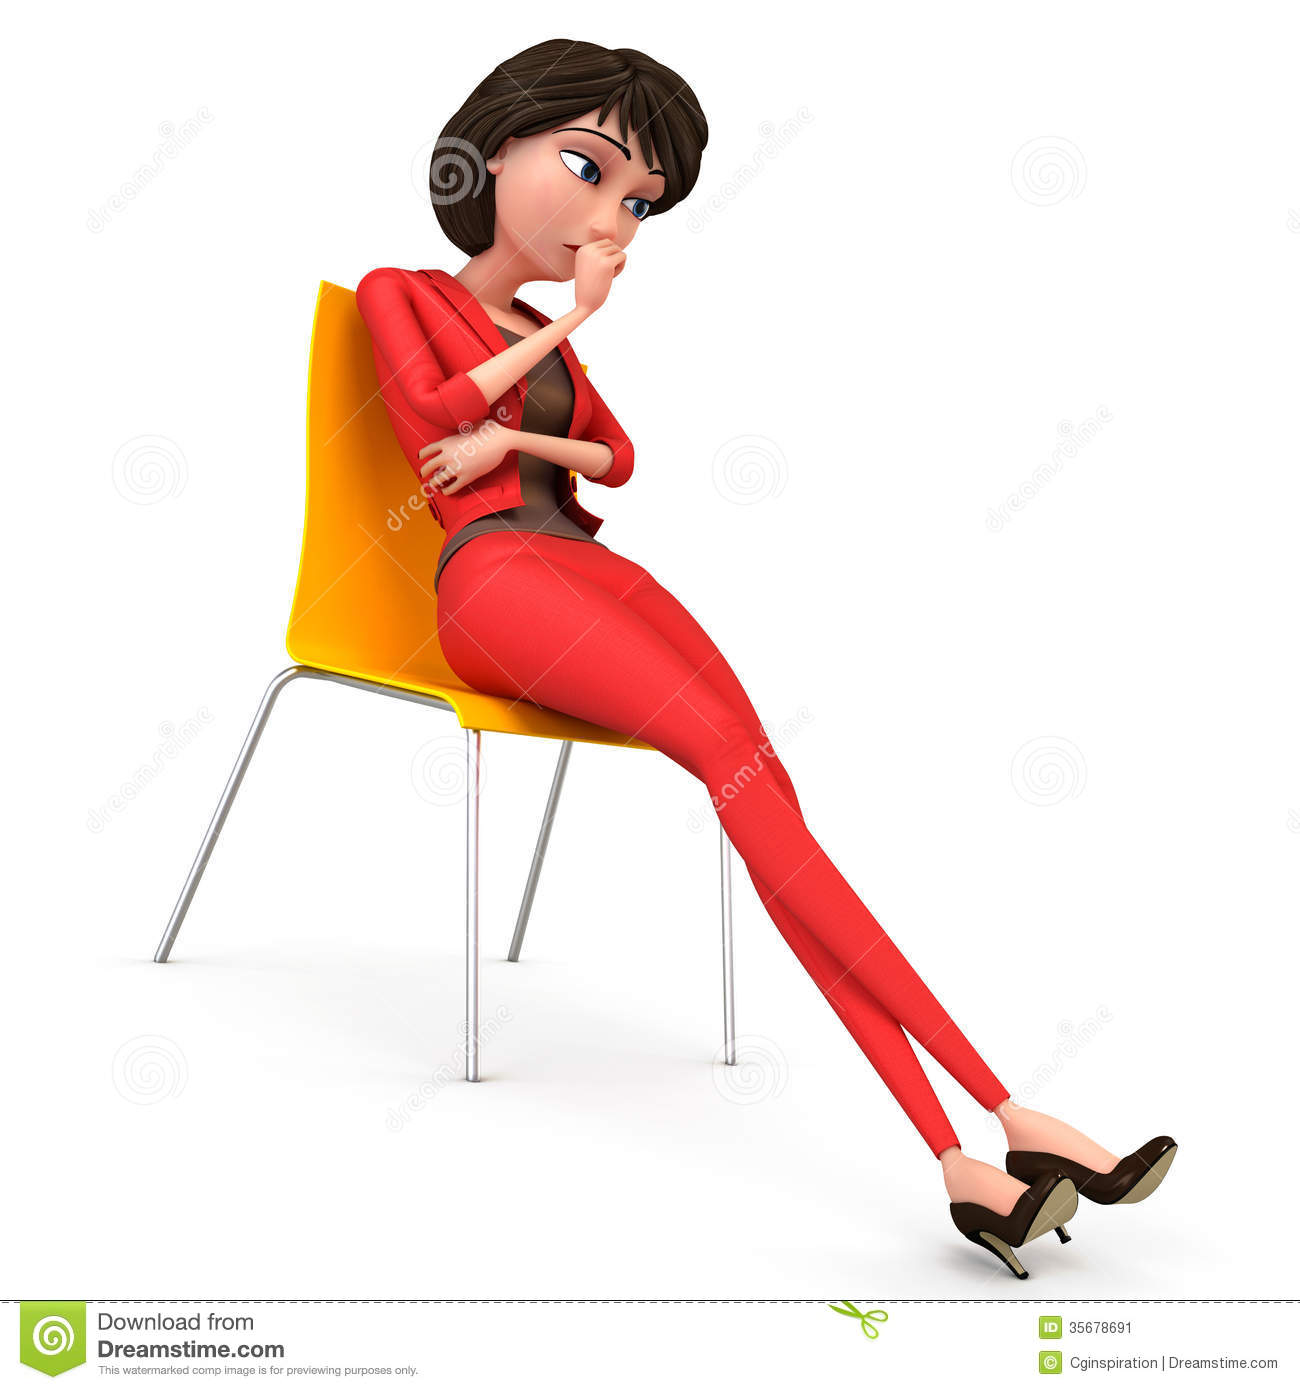 Confused Businesswoman Stock Image   Image  35678691